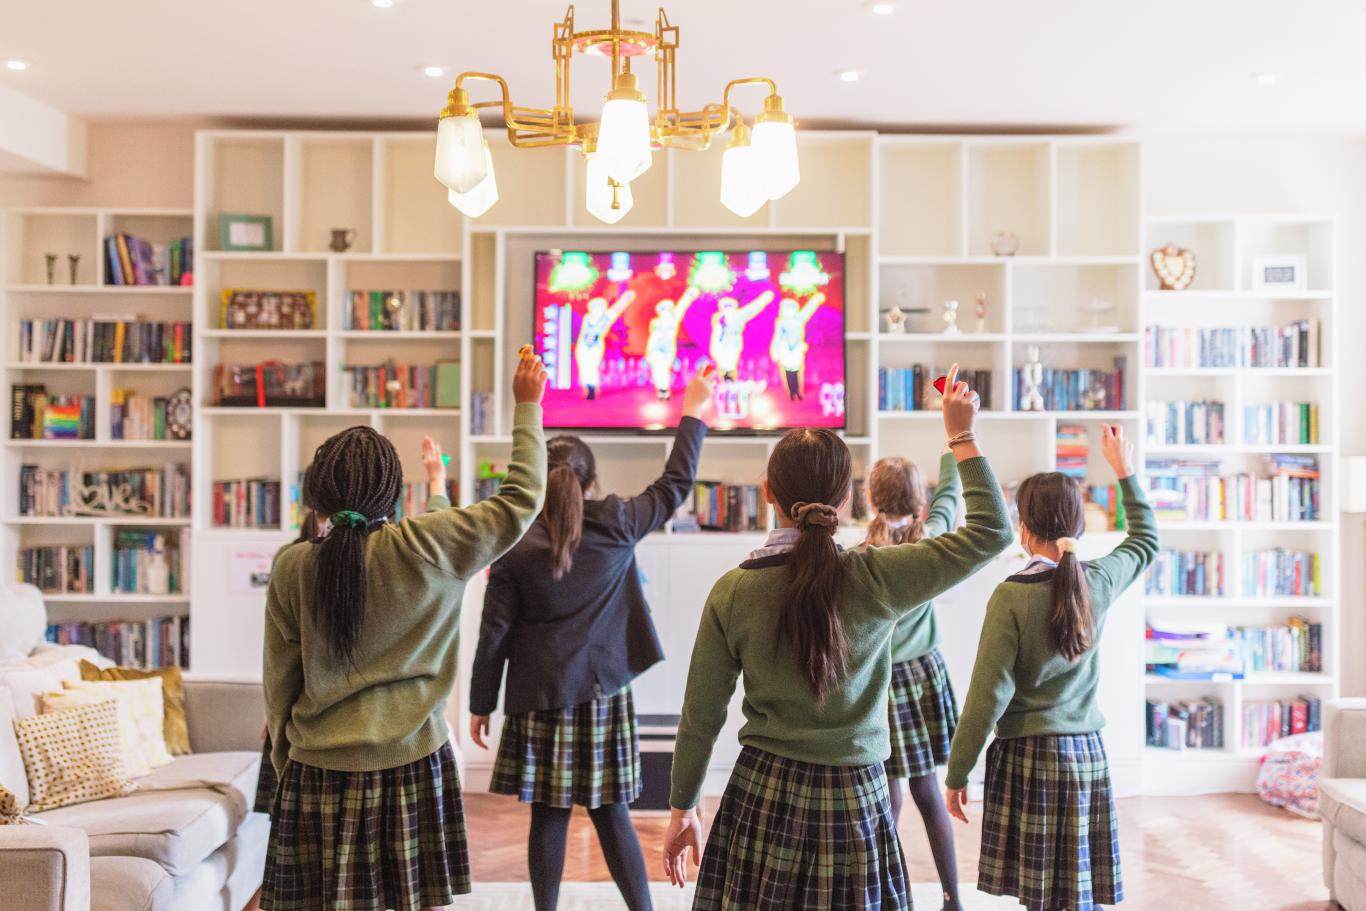 5 students in CLC uniform dance to Just Dance on a Wii console